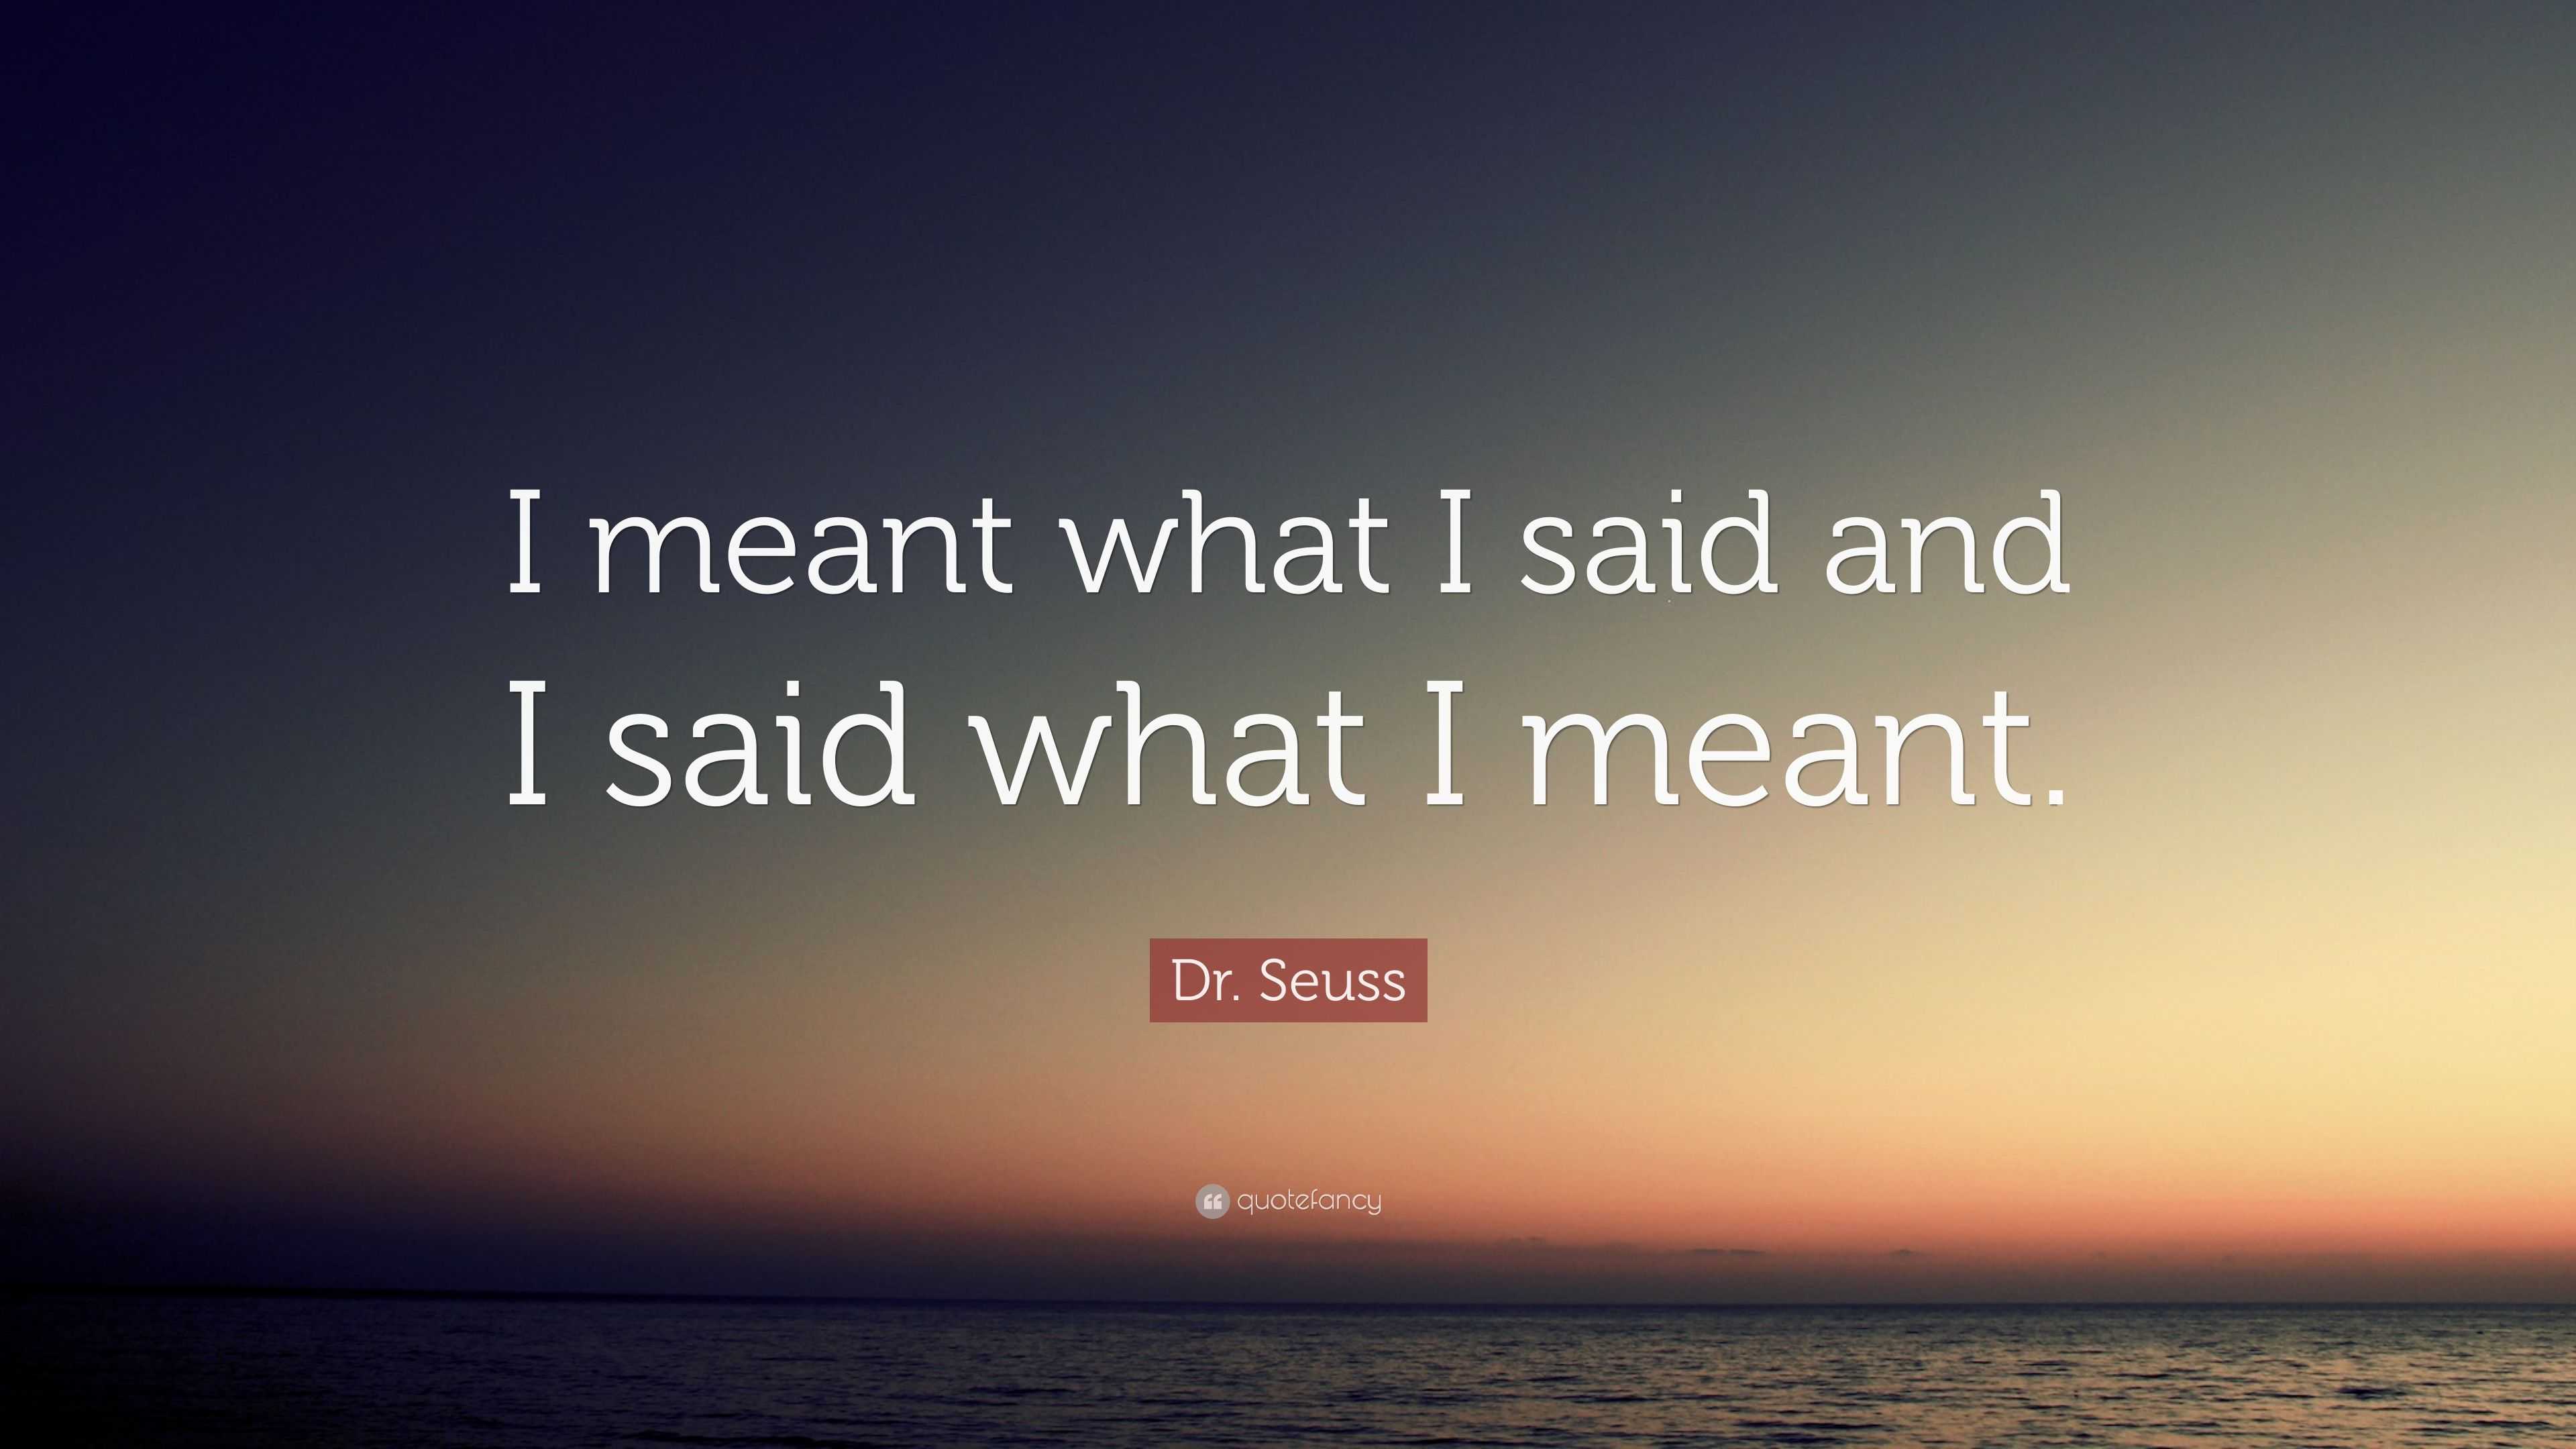 Dr. Seuss Quote: “I meant what I said and I said what I meant.”